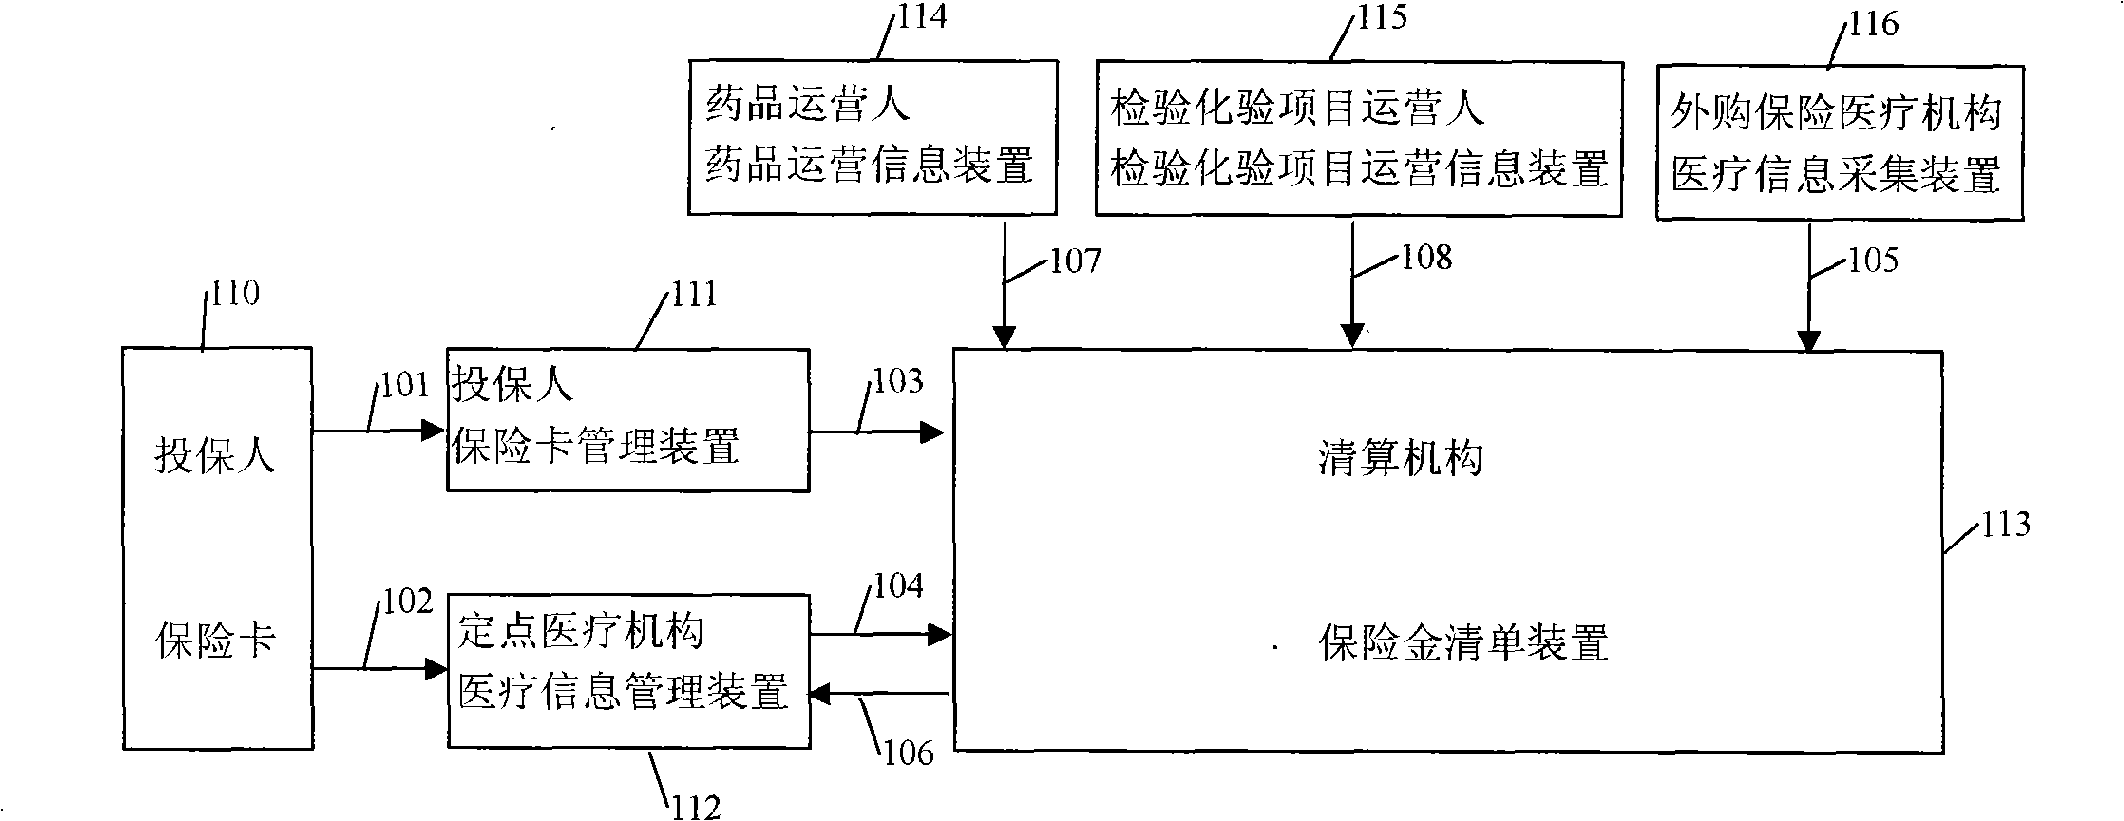 A medical treatment insurance fund payment device and method